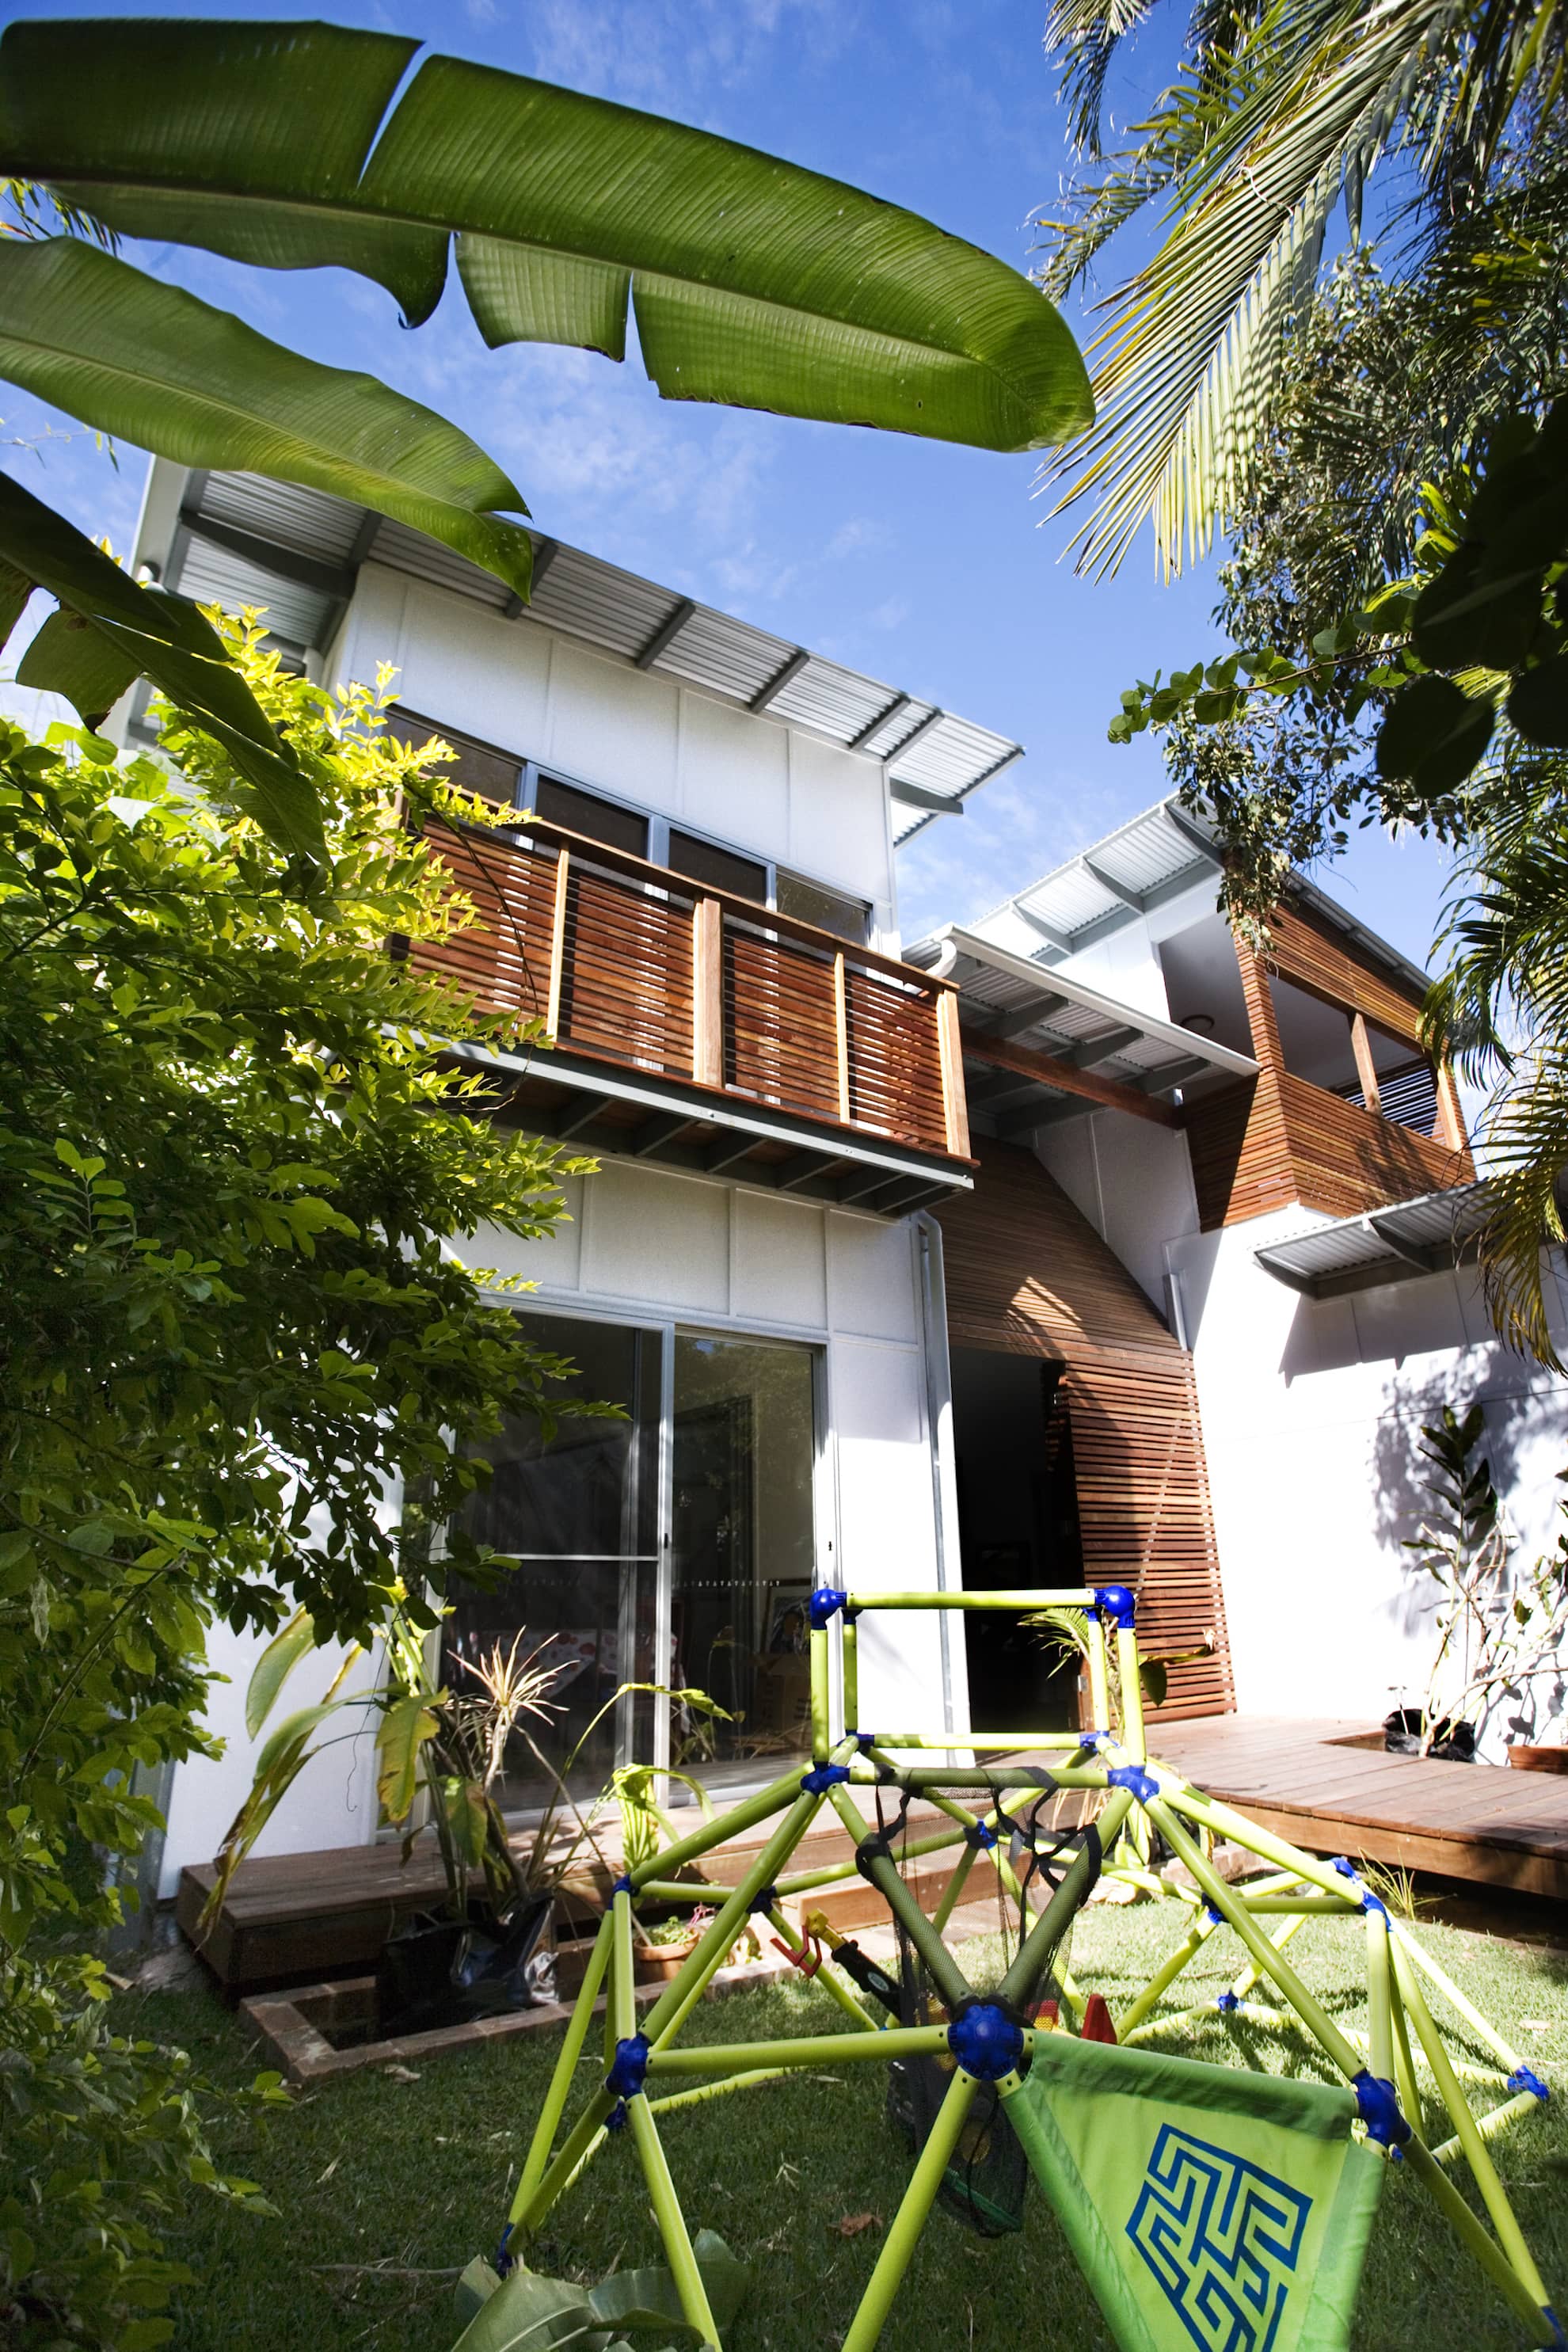 Depper Street project by mdesign, a building design practice that operates on the Sunshine Coast.